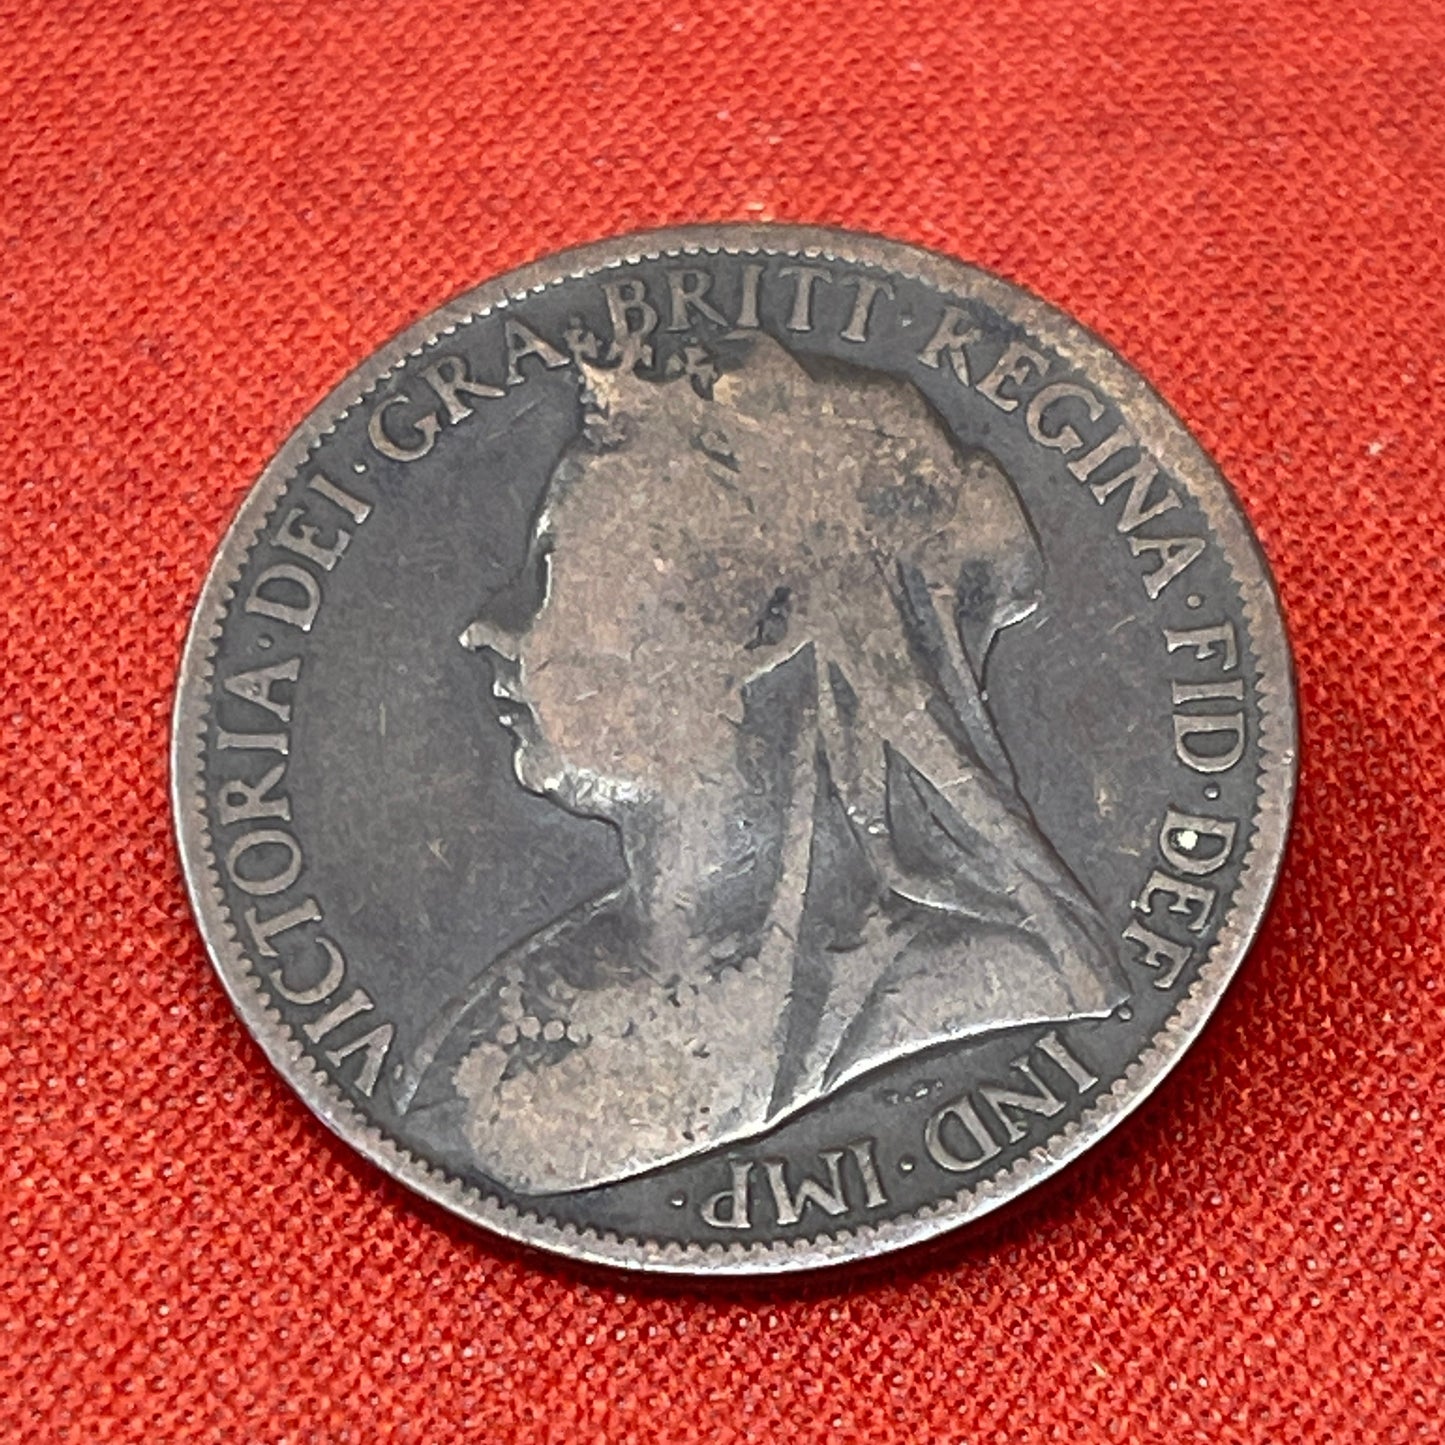 1899 Oueen Victoria One Penny